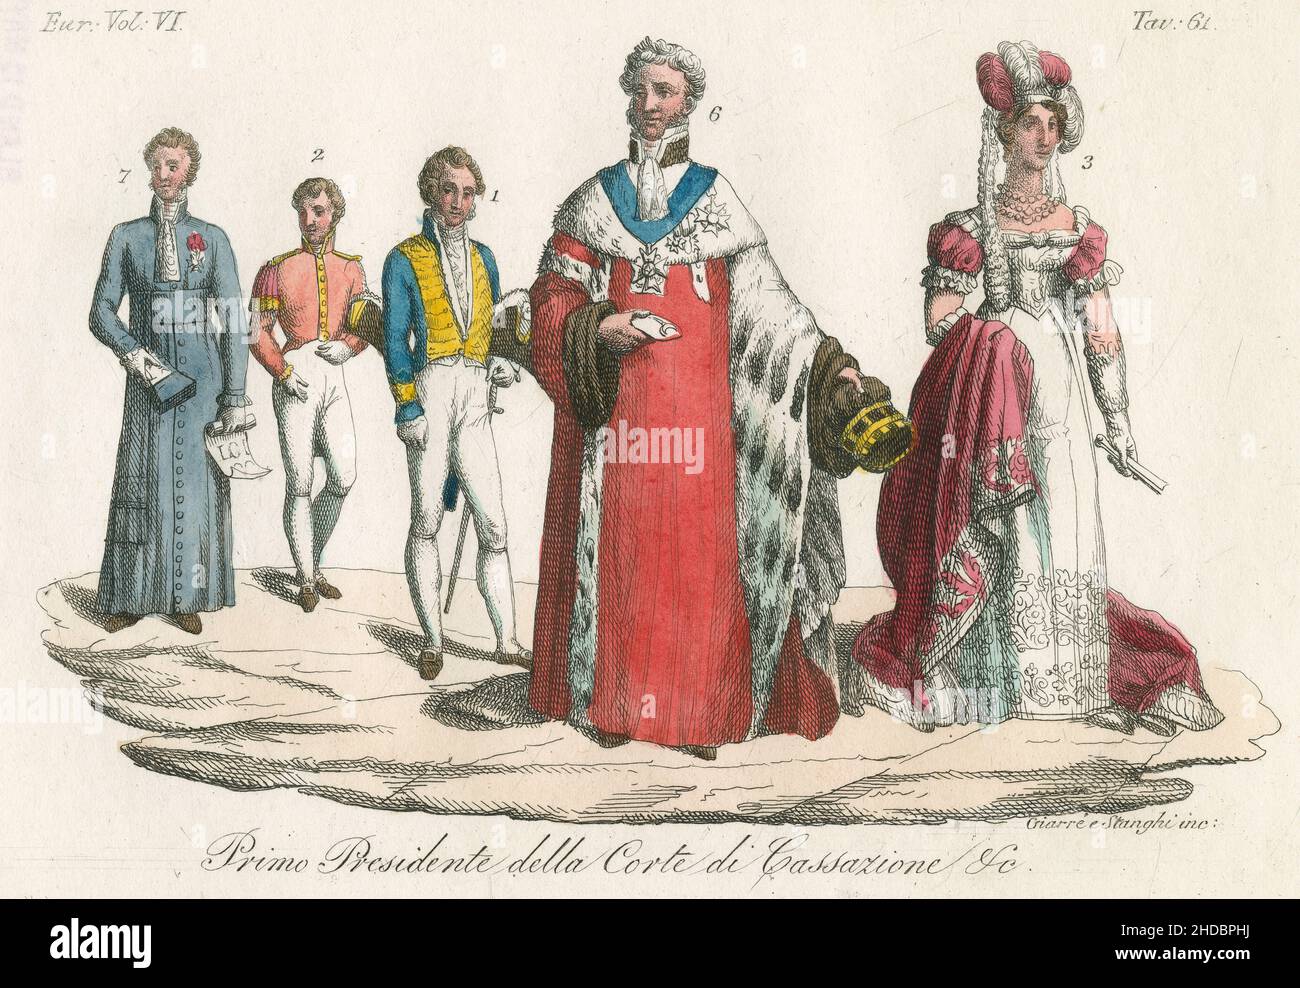 Antique c1830 hand-tinted engraving, fashions of the French court circa 1820. From l to r, (7) Guard of the seal of the Ministry of Justice, (2) Page, (1) 1st gentleman of the bedchamber, (6) President of the Court of Appeals, and (3) Court lady. Published by Giulio Ferrario. SOURCE: ORIGINAL ENGRAVING Stock Photo